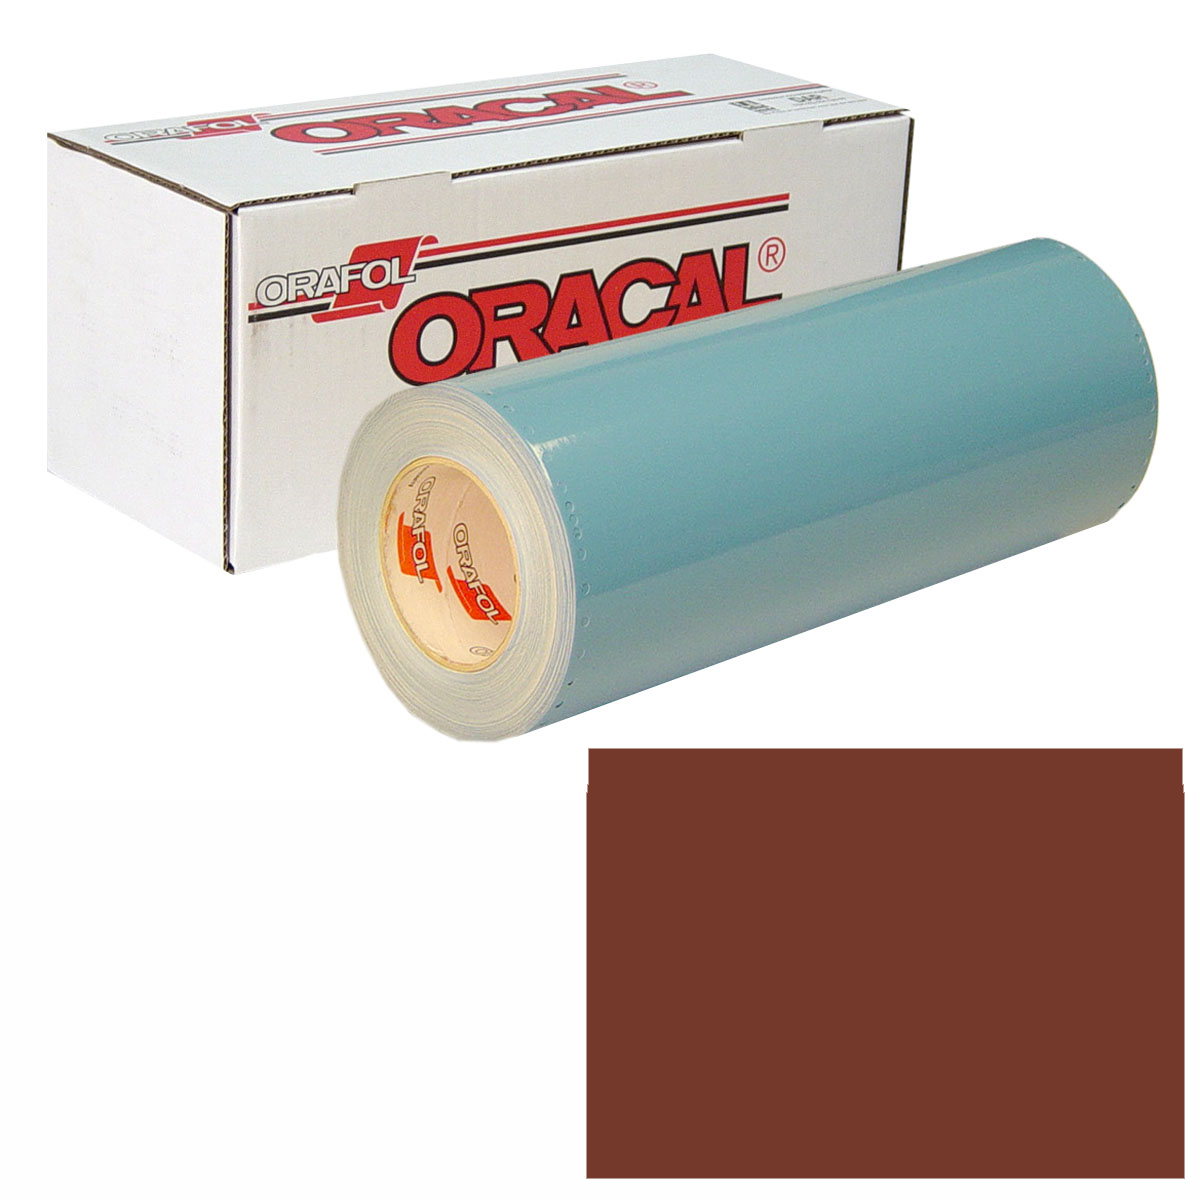 ORACAL 751 15in X 10yd 079 Red Brown